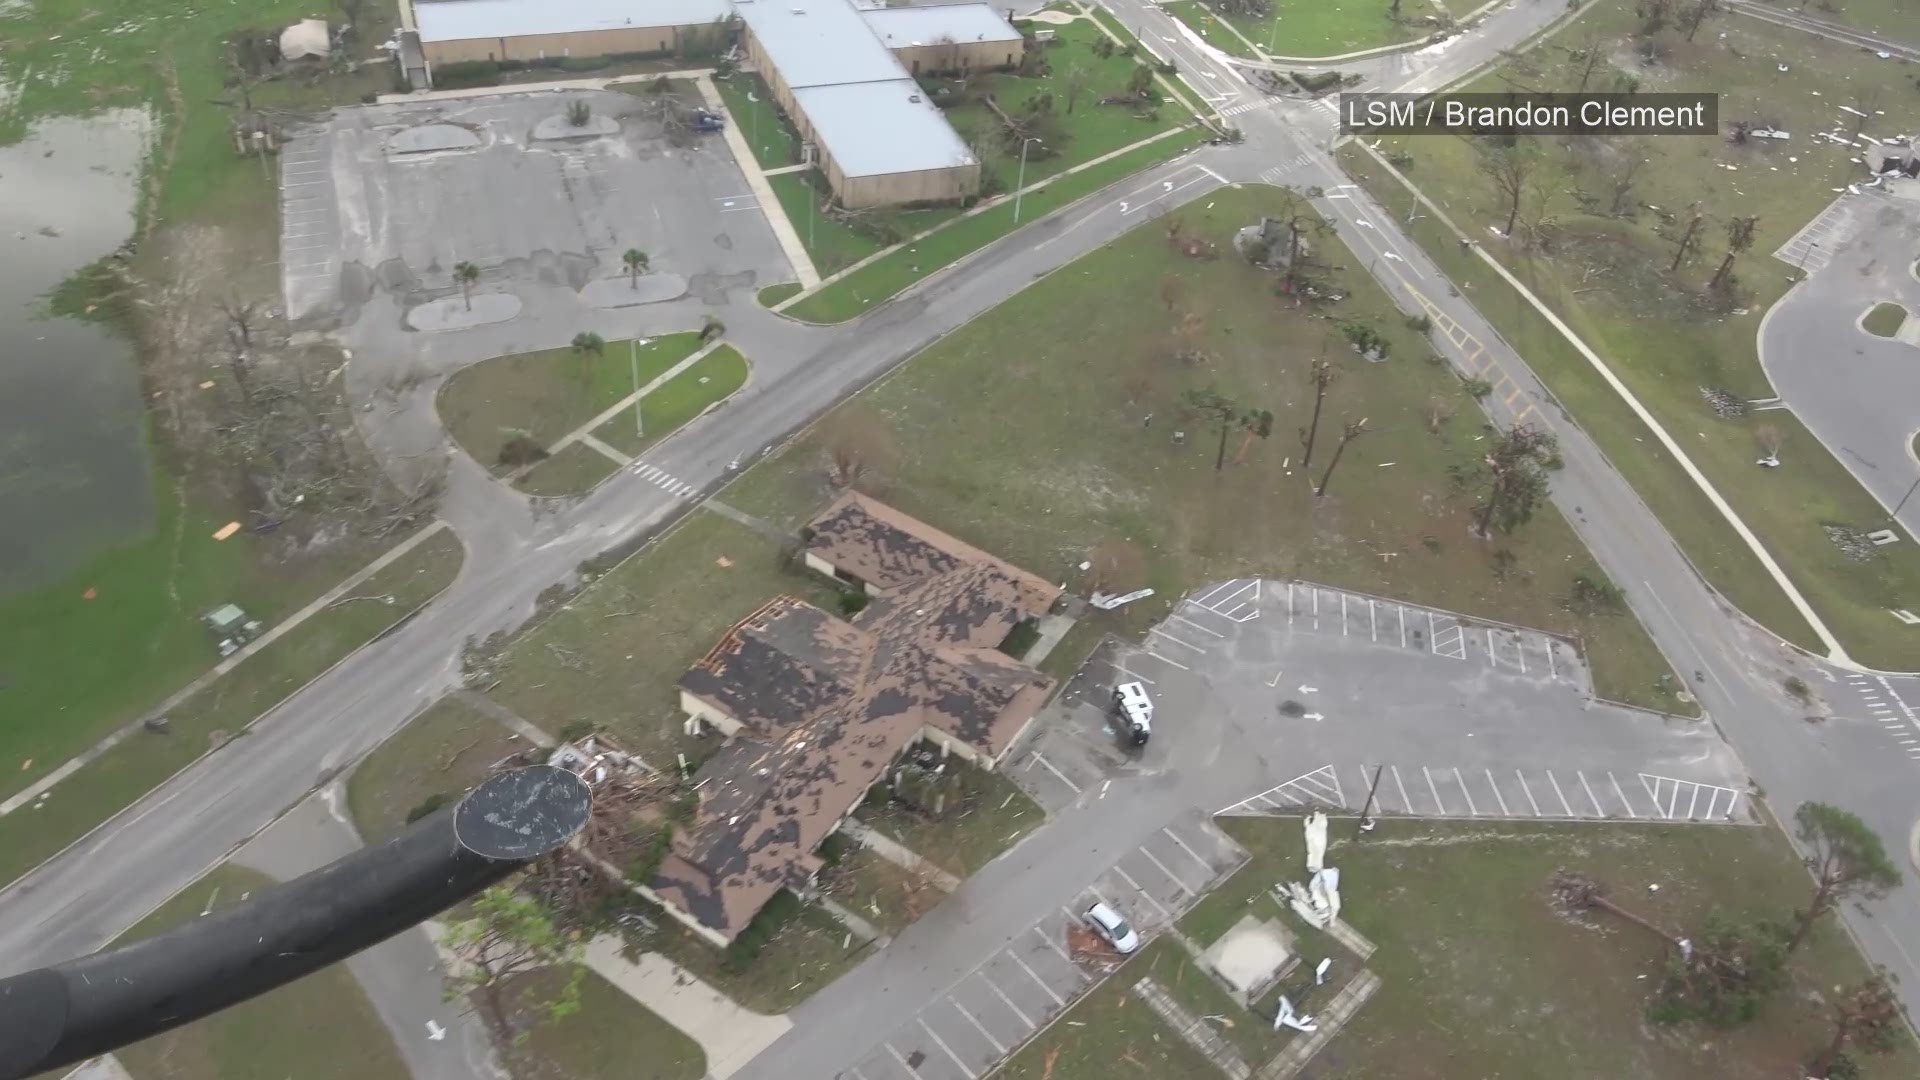 Tyndall Air Force Base leaders say the Florida facility suffered 'widespread catastrophic damage' from Hurricane Michael. (LSM / Brandon Clement)